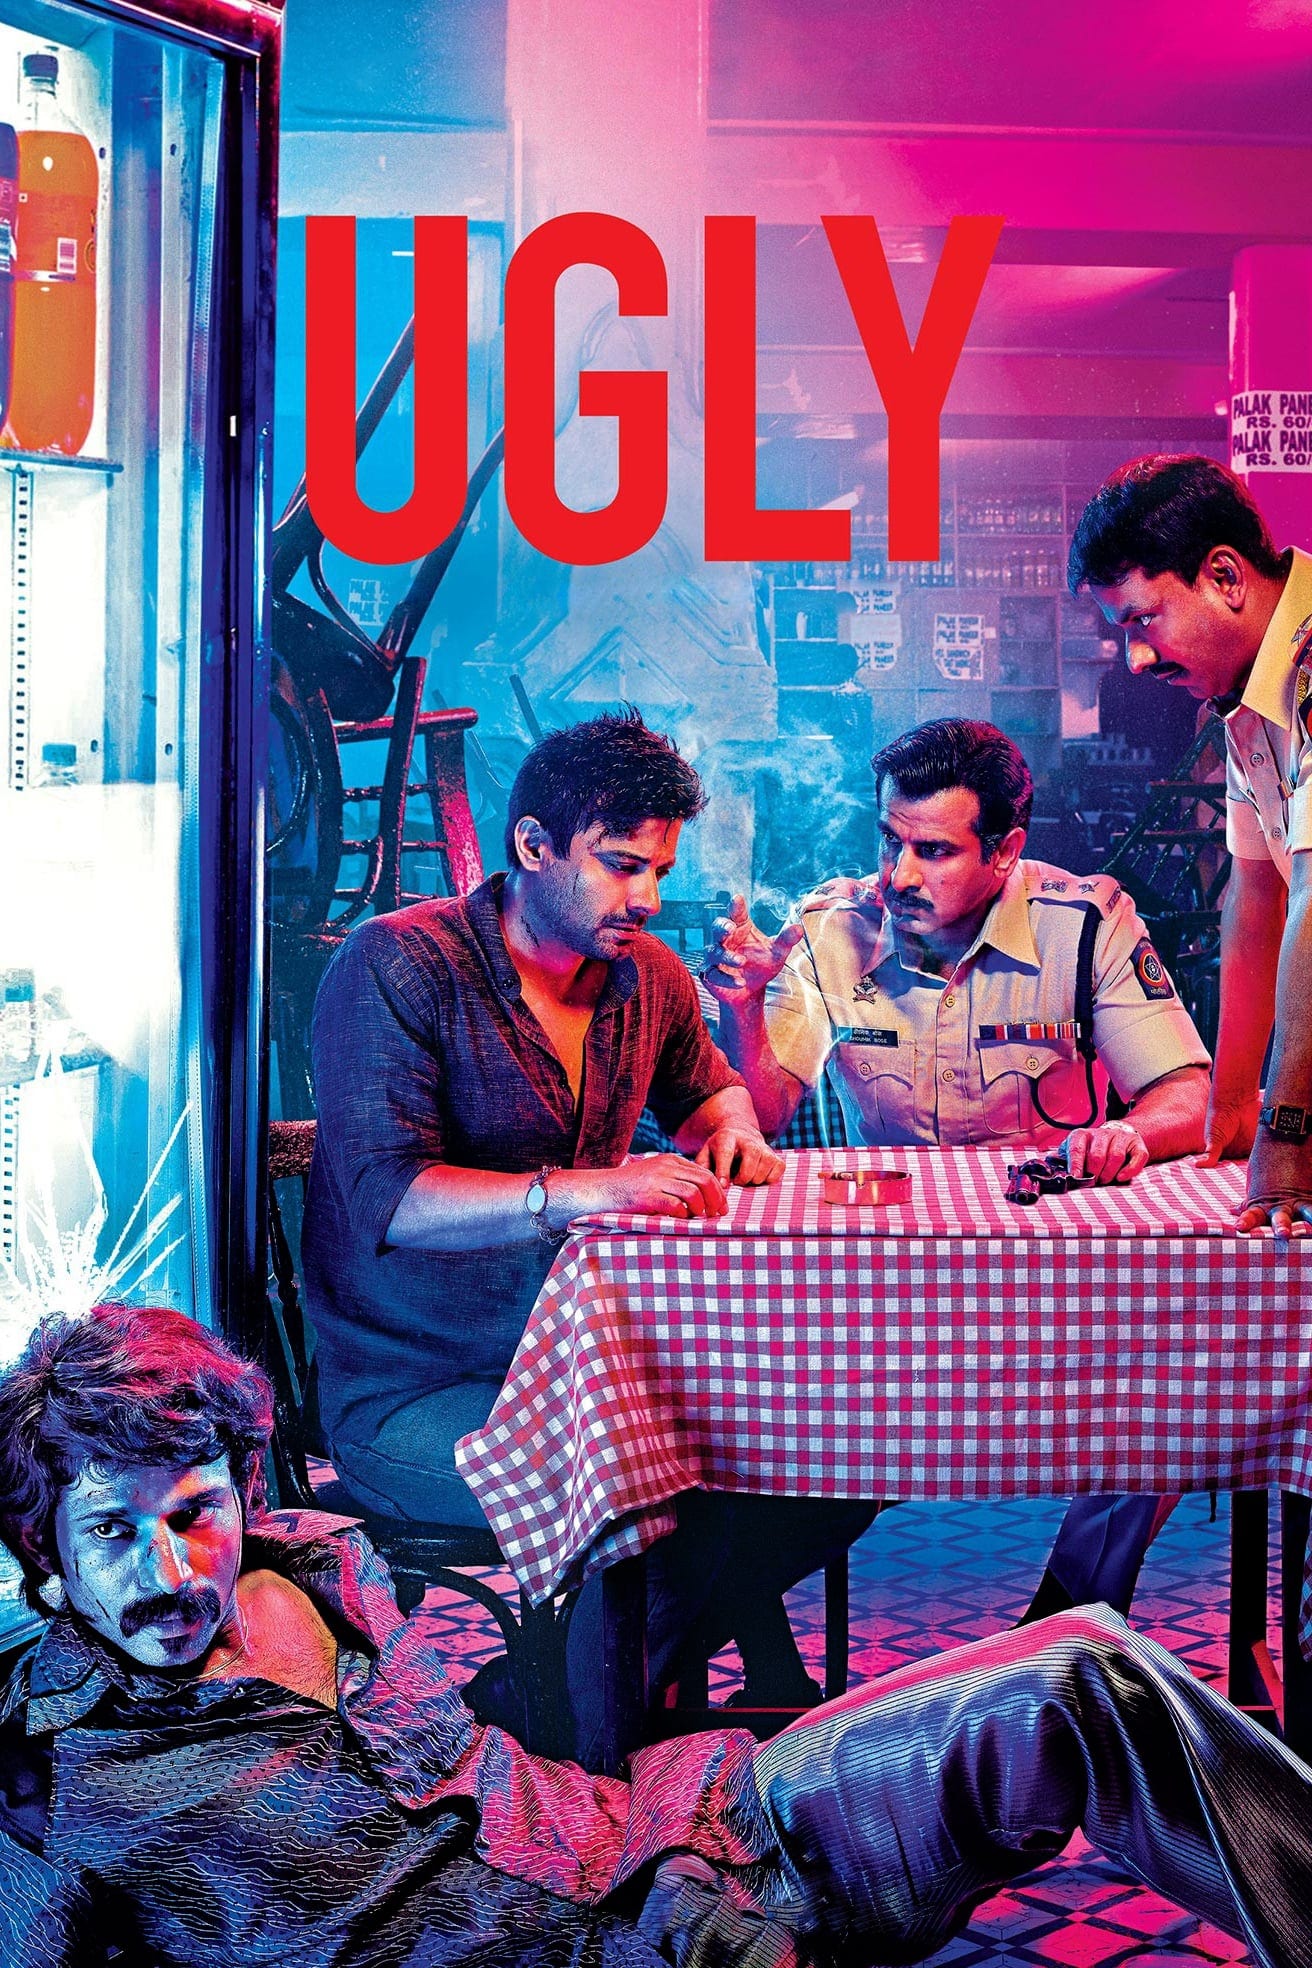 Poster for the movie "Ugly"